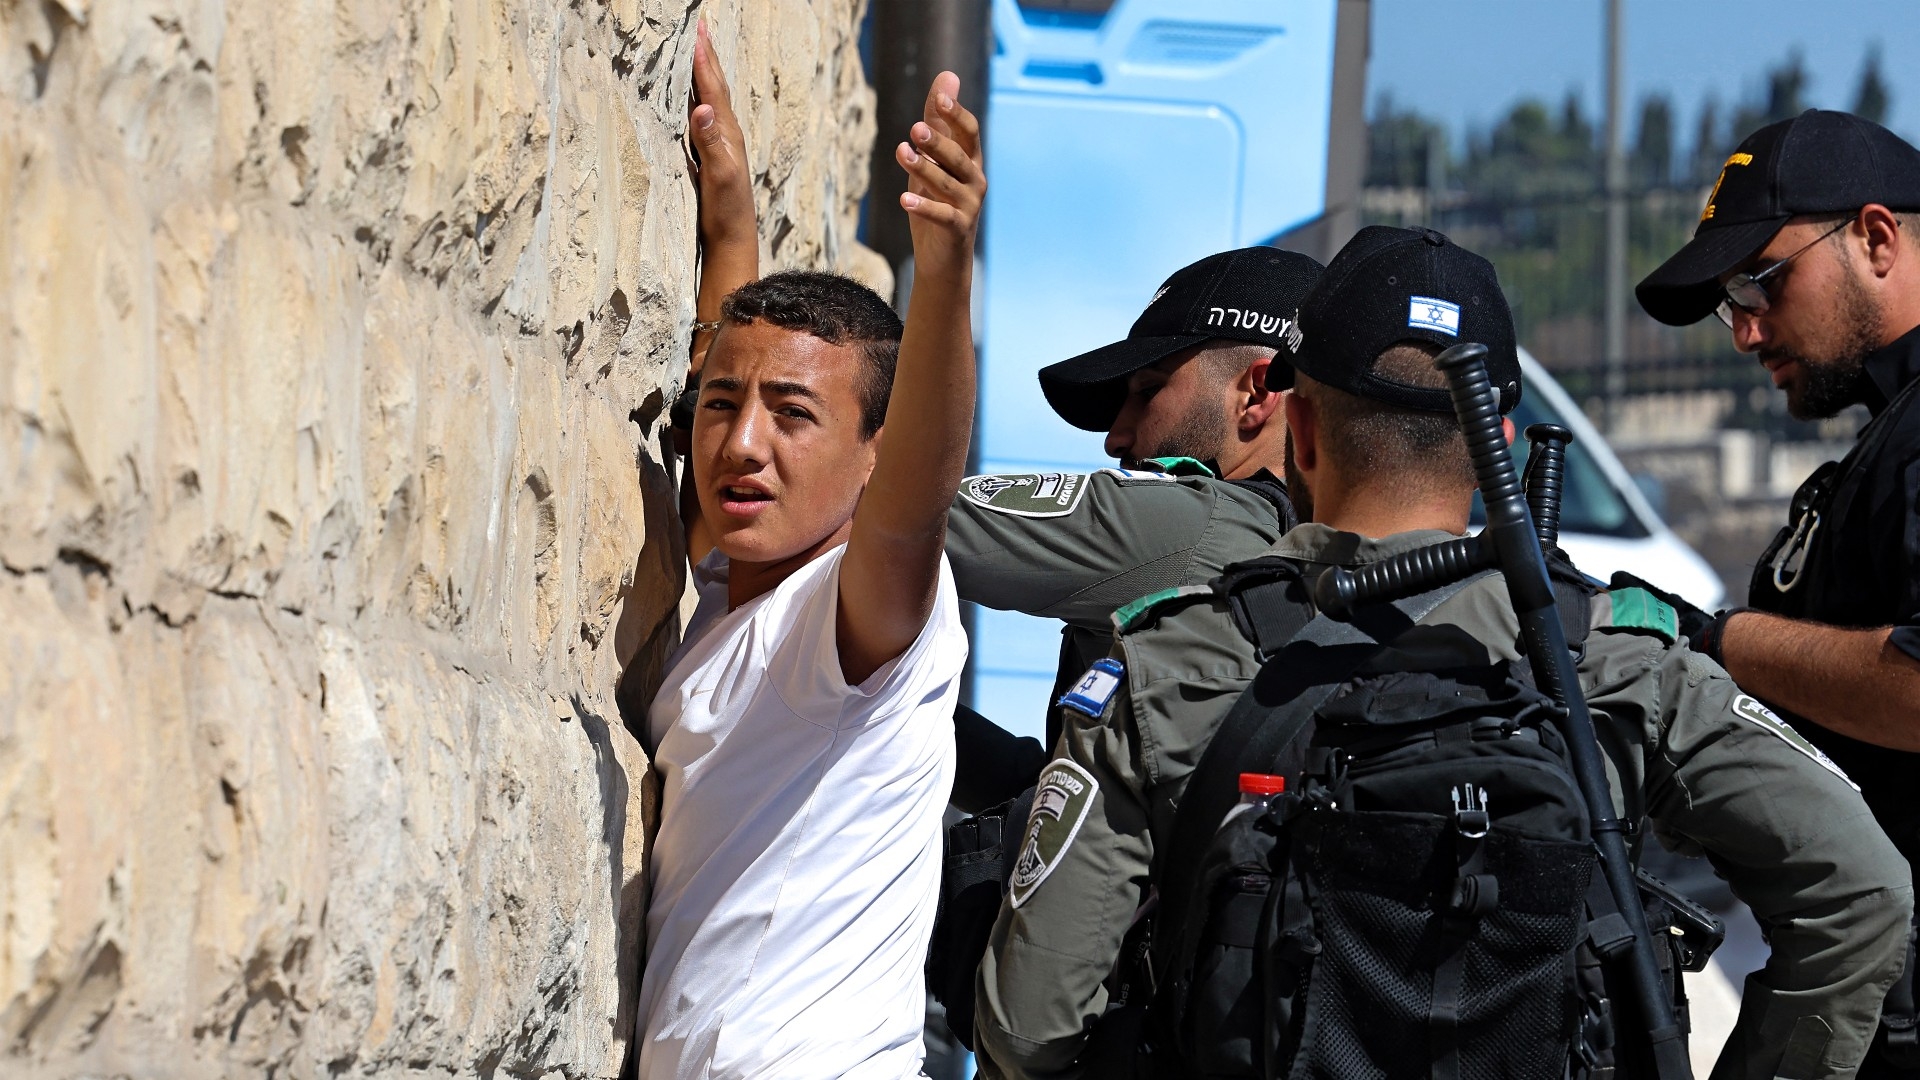 Israeli border guards search a Palestinian youth outside the Lion's Gate of the Old City of Jerusalem on 13 October (AFP)